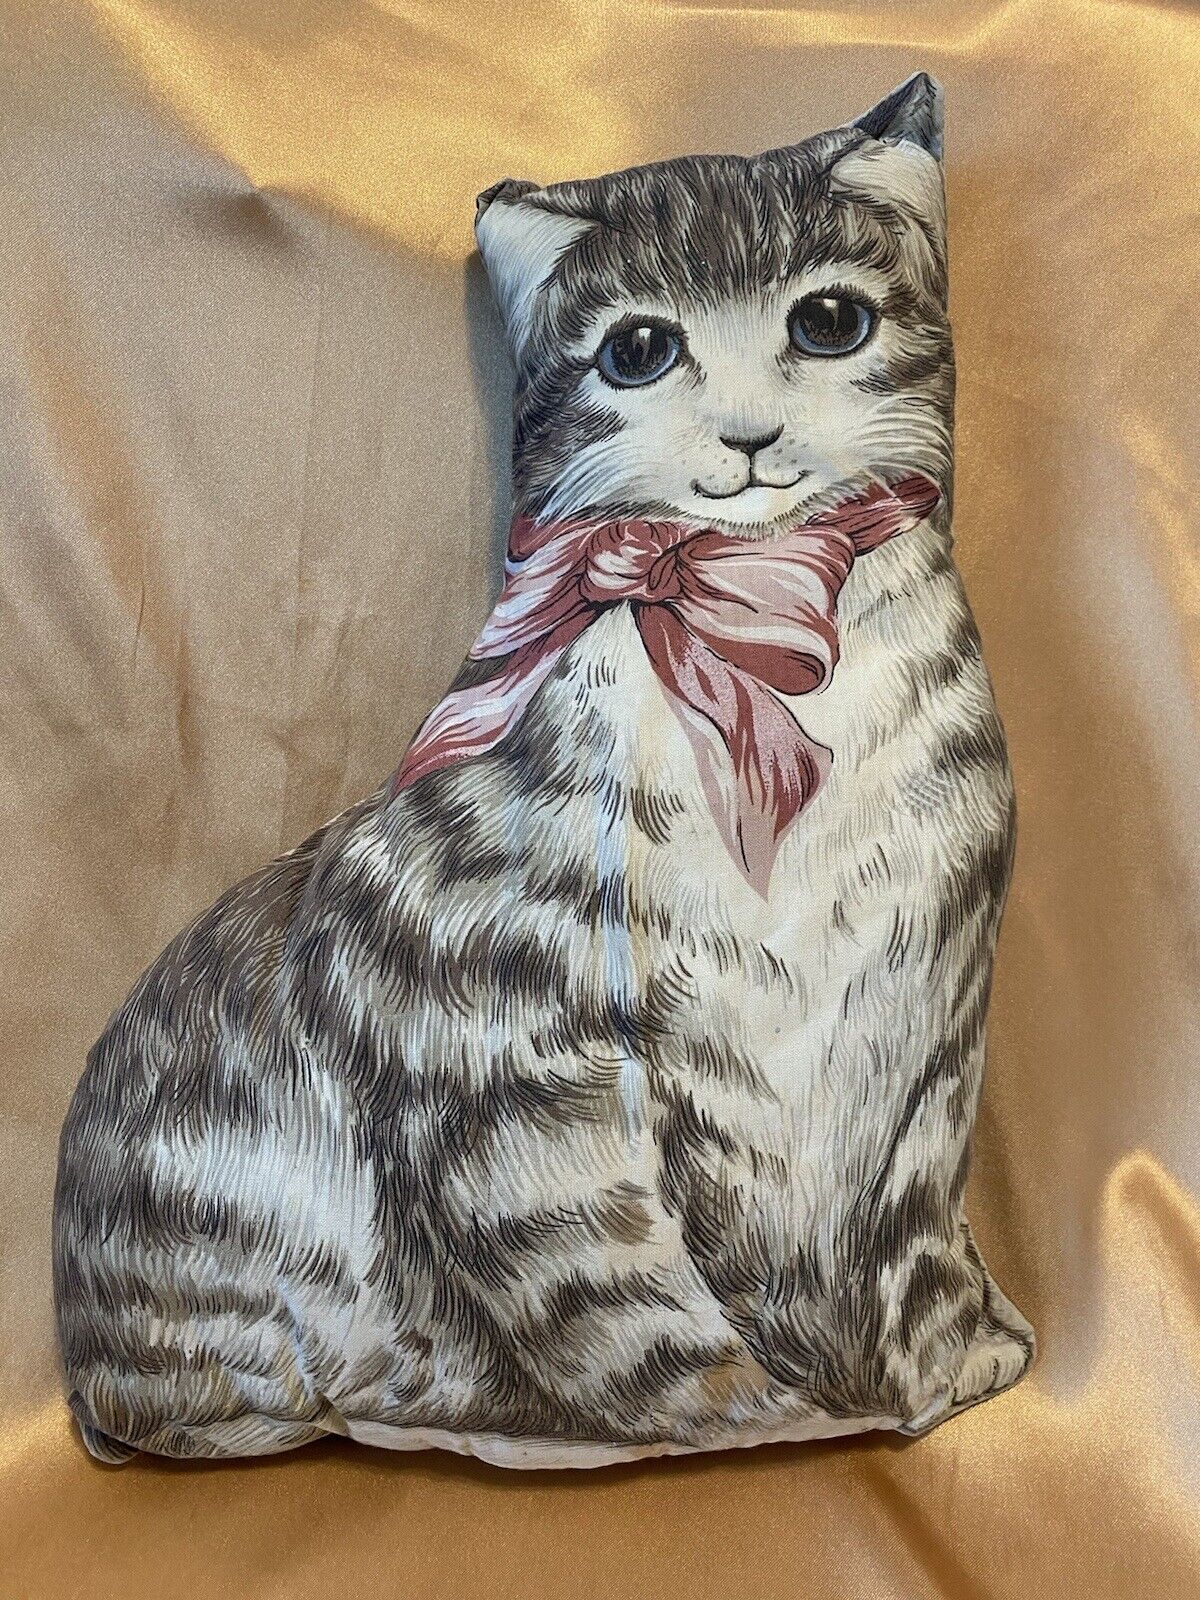 Vintage Handmade Tabby Cat Pillow with Pink Bow, 13.5”